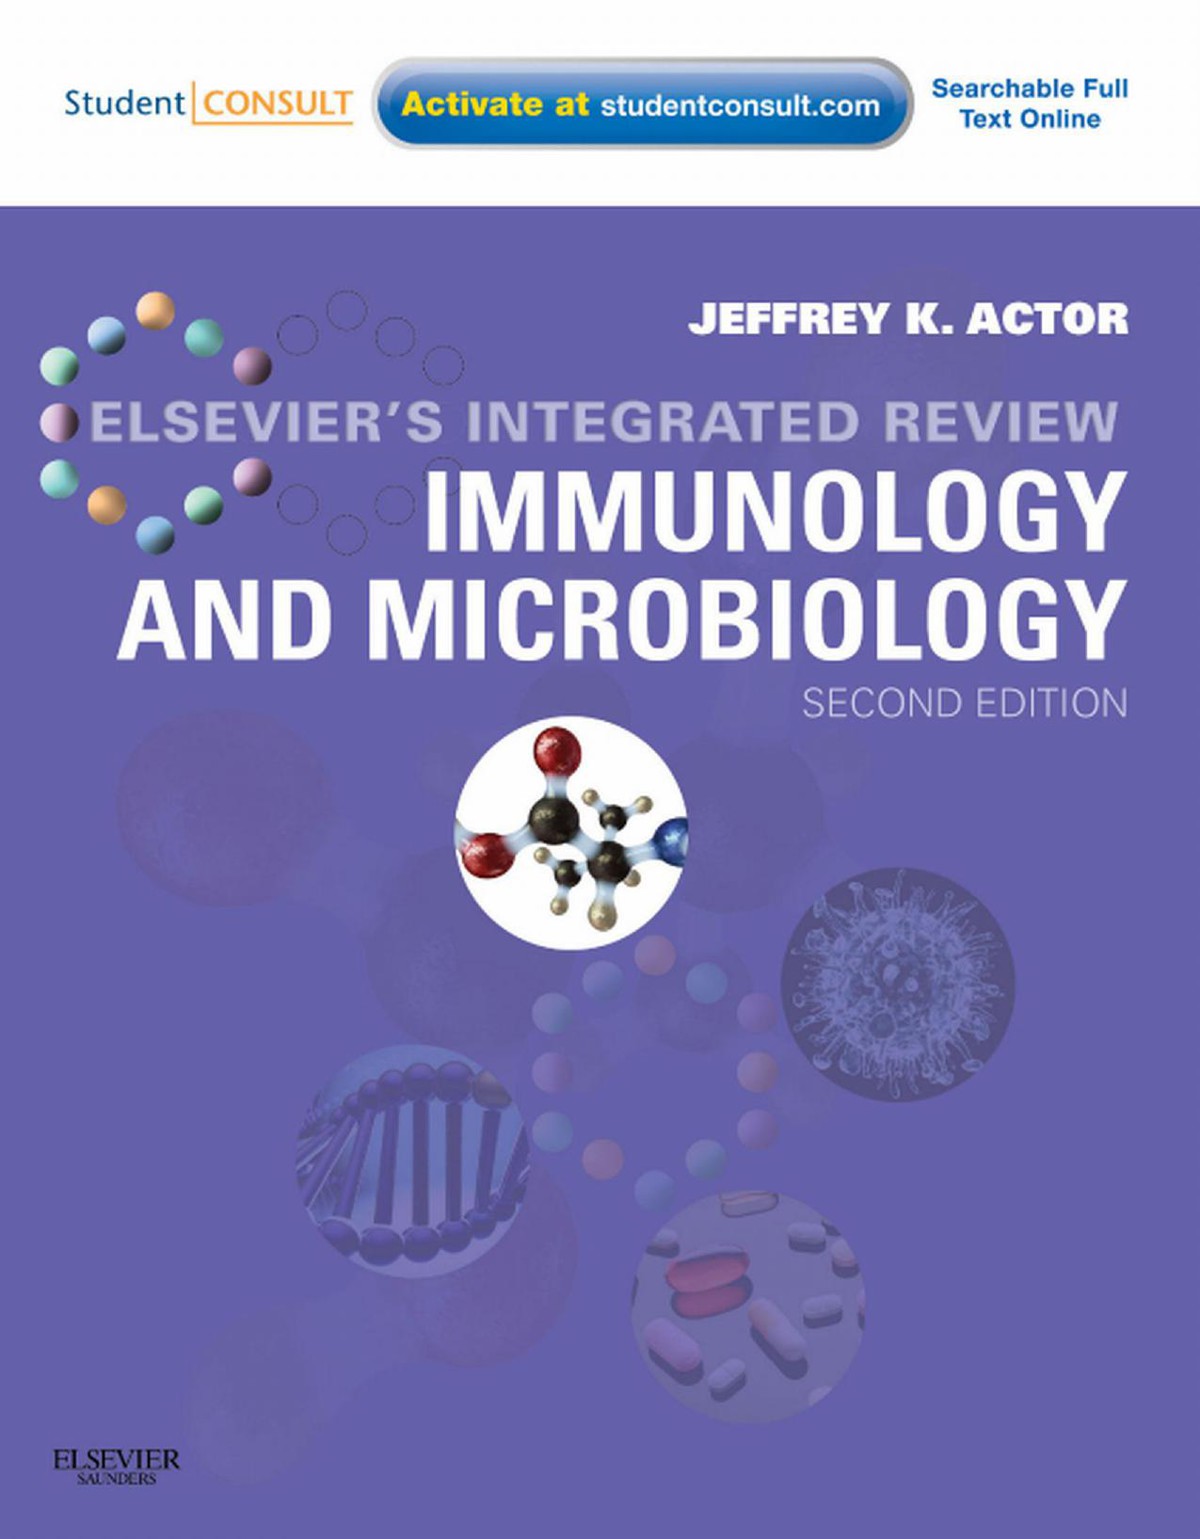 Elsevier's Integrated Review Immunology and Microbiology 2nd Edition PDF